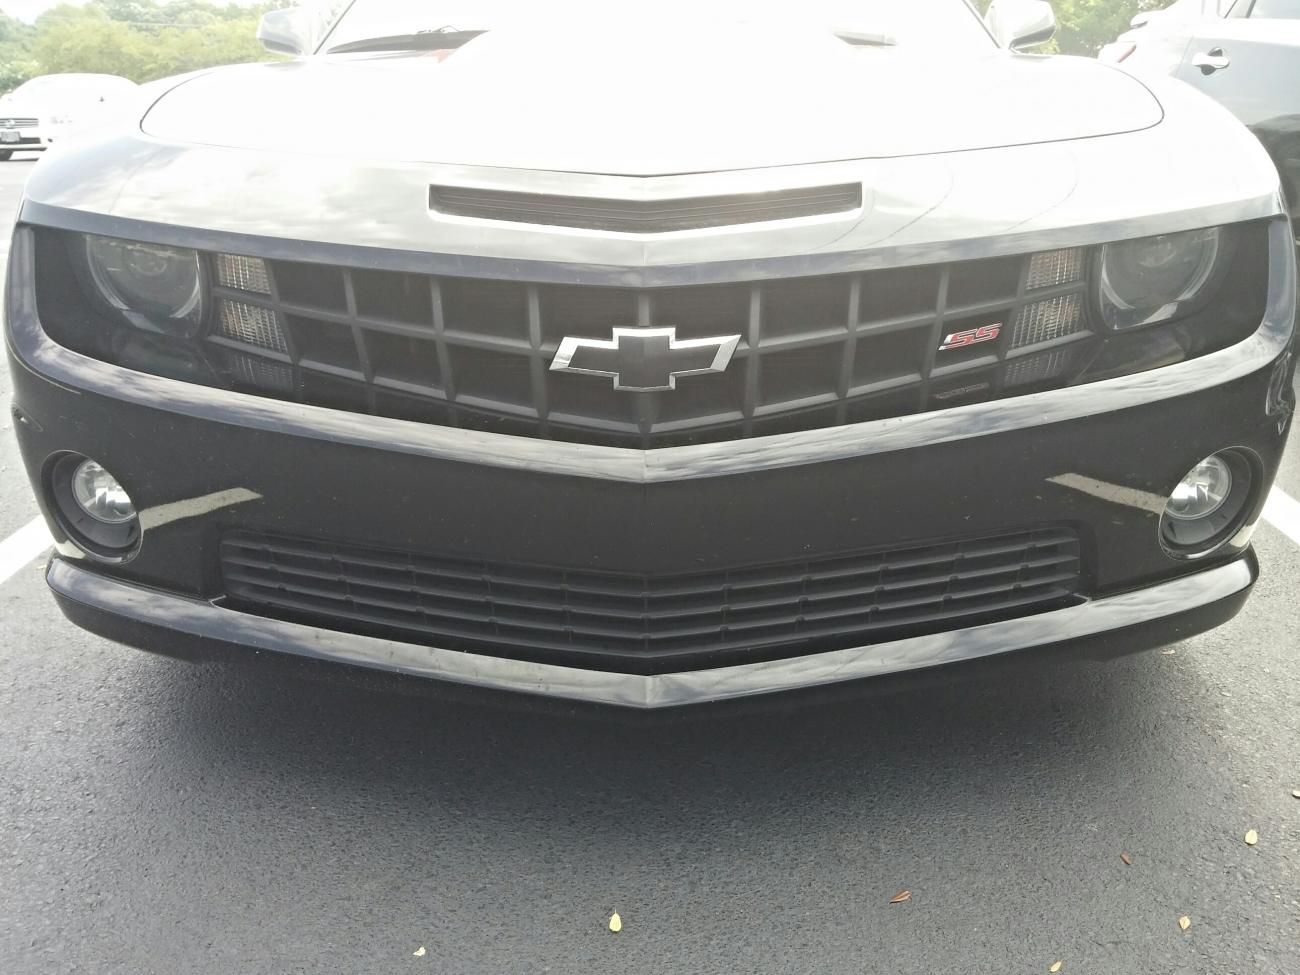 Name:  Stock grille.jpg
Views: 542
Size:  143.8 KB